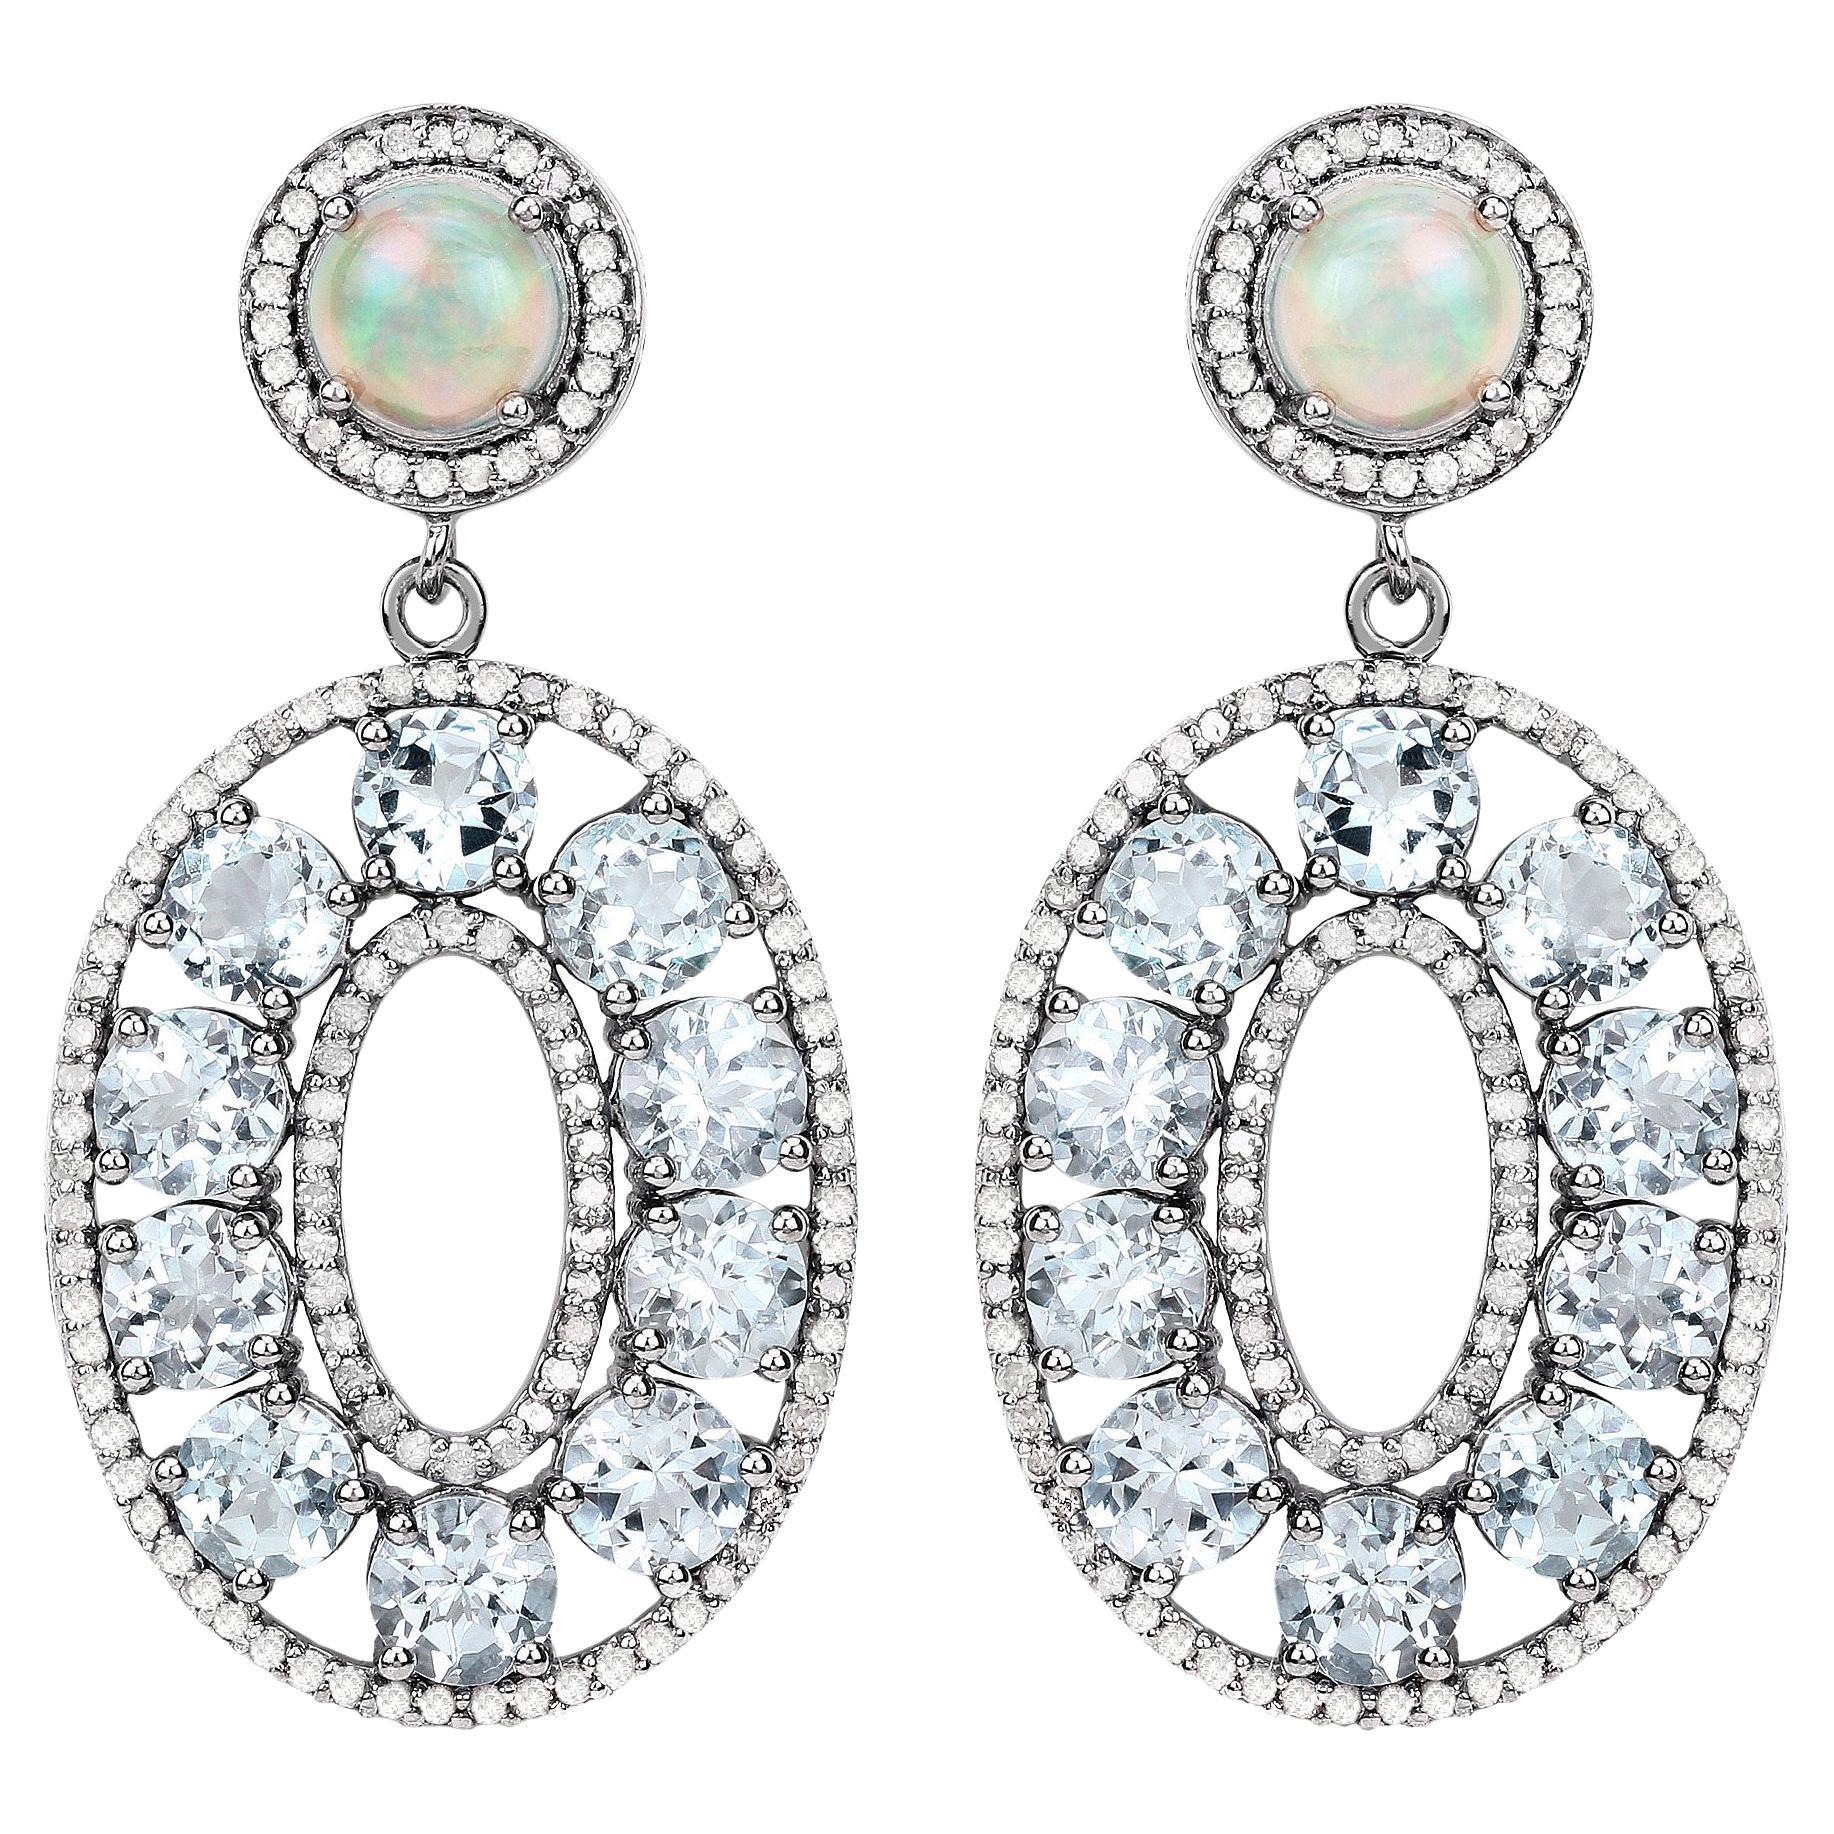 Aquamarine Earrings With Opals and Diamonds 11.82 Carats Sterling Silver For Sale